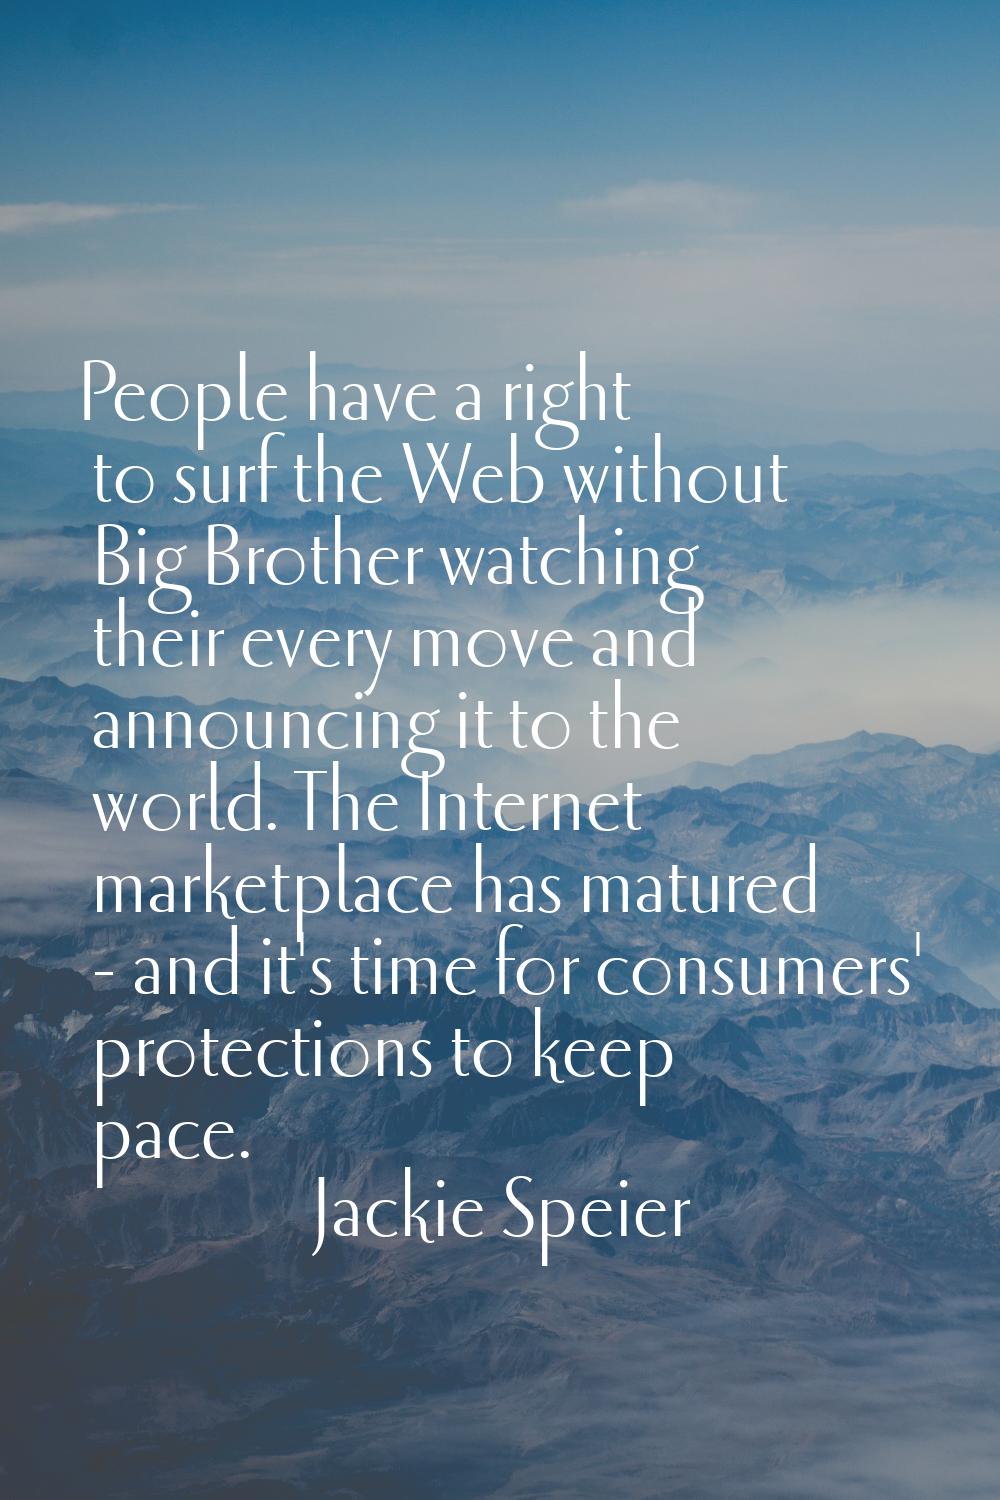 People have a right to surf the Web without Big Brother watching their every move and announcing it